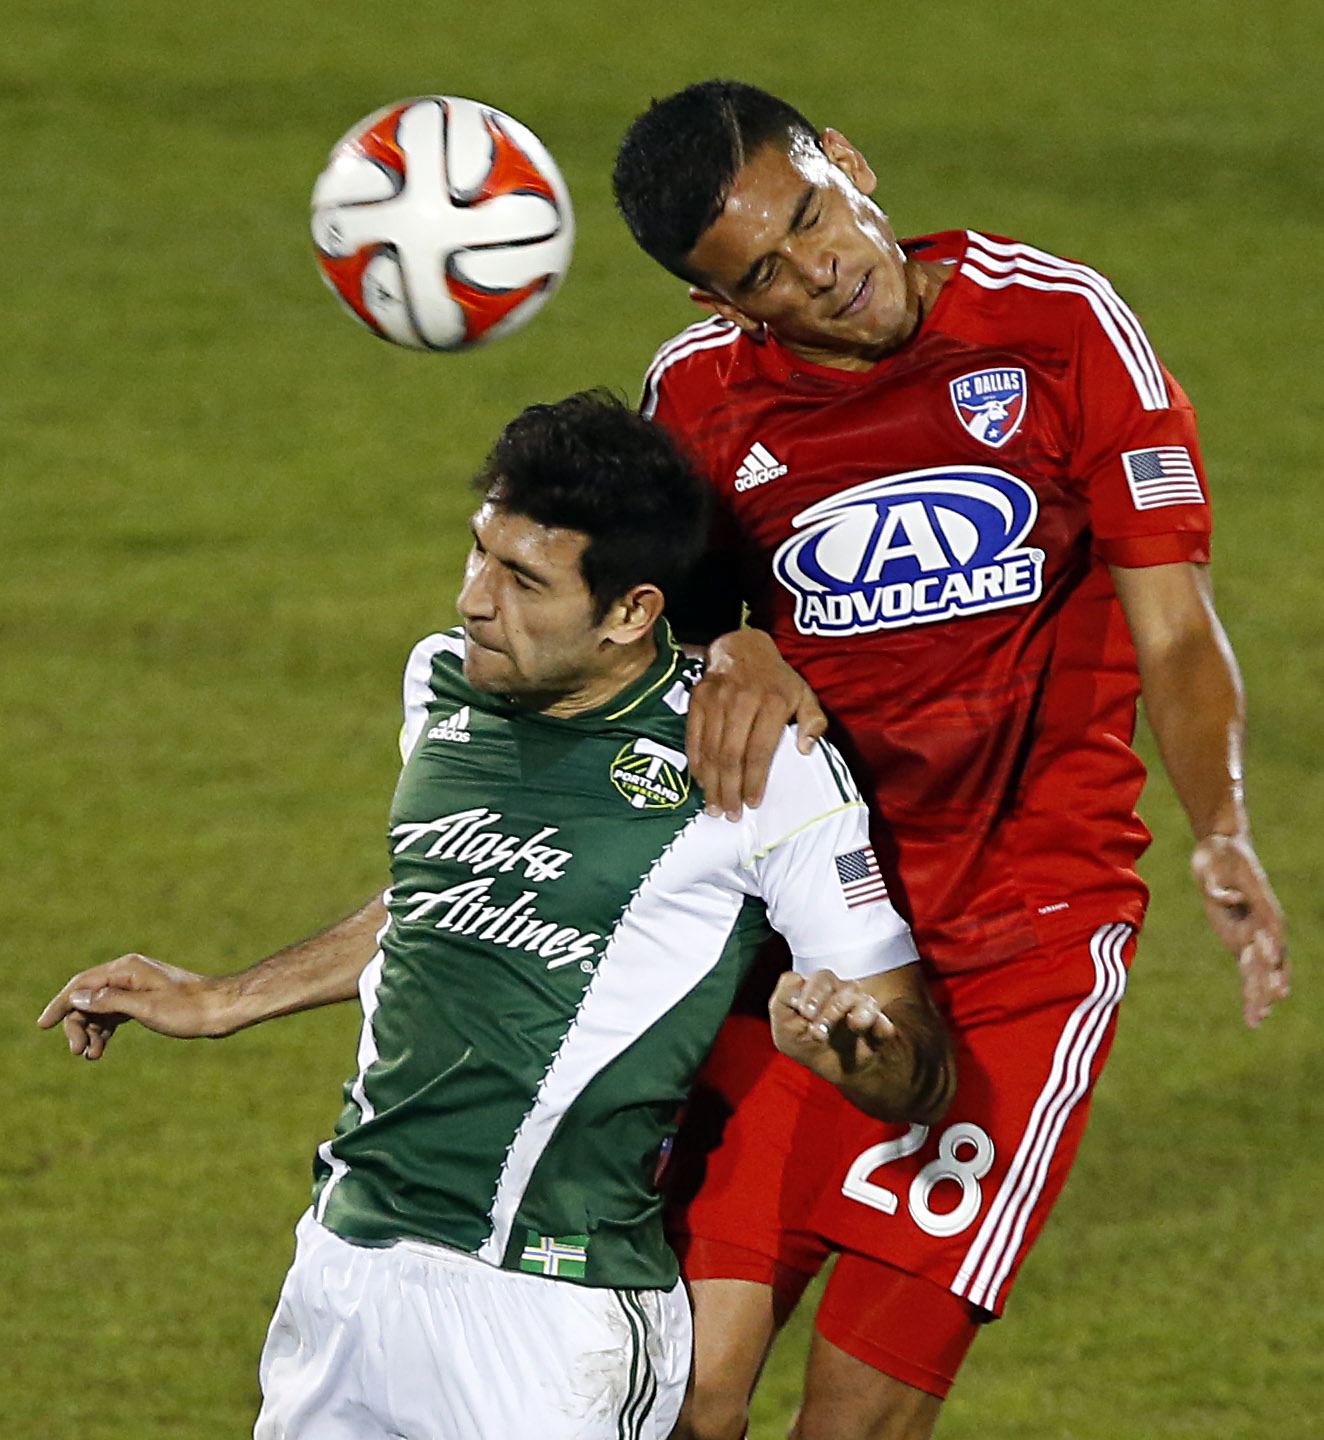 FC Dallas midfielder Victor Ulloa (28) and Portland Timbers midfielder Diego Valeri (8) go up for a header in the first half of an MLS soccer game at Toyota Stadium in Frisco, Texas, on Saturday, March 29, 2014.